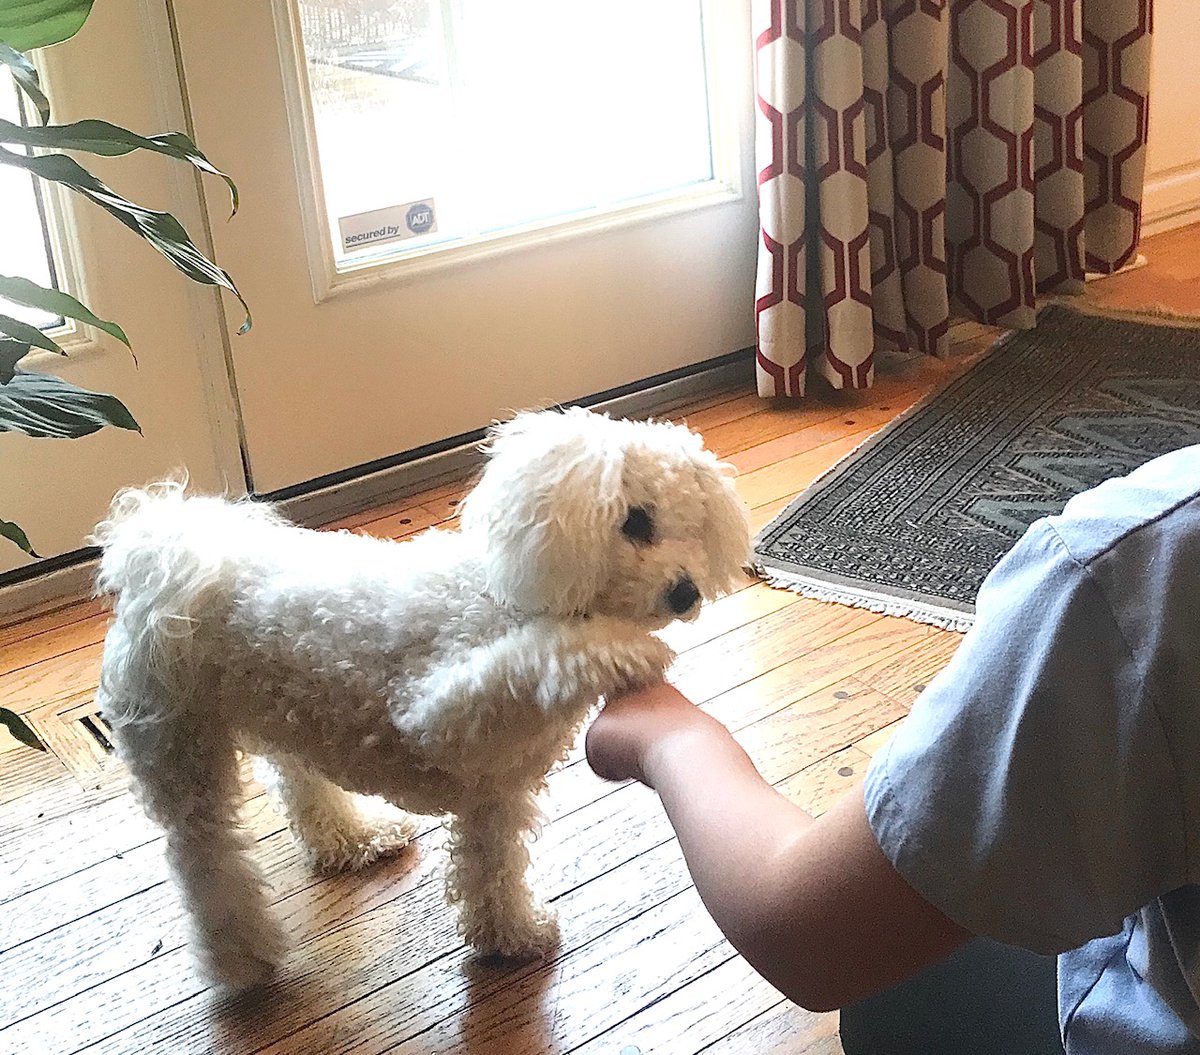 (4/5) She was teaching the dog to fist bump and it worked. I’m pretty sure she loves dogs more than people. This dog is her first dog and, well, the extra time together has been the silver lining.